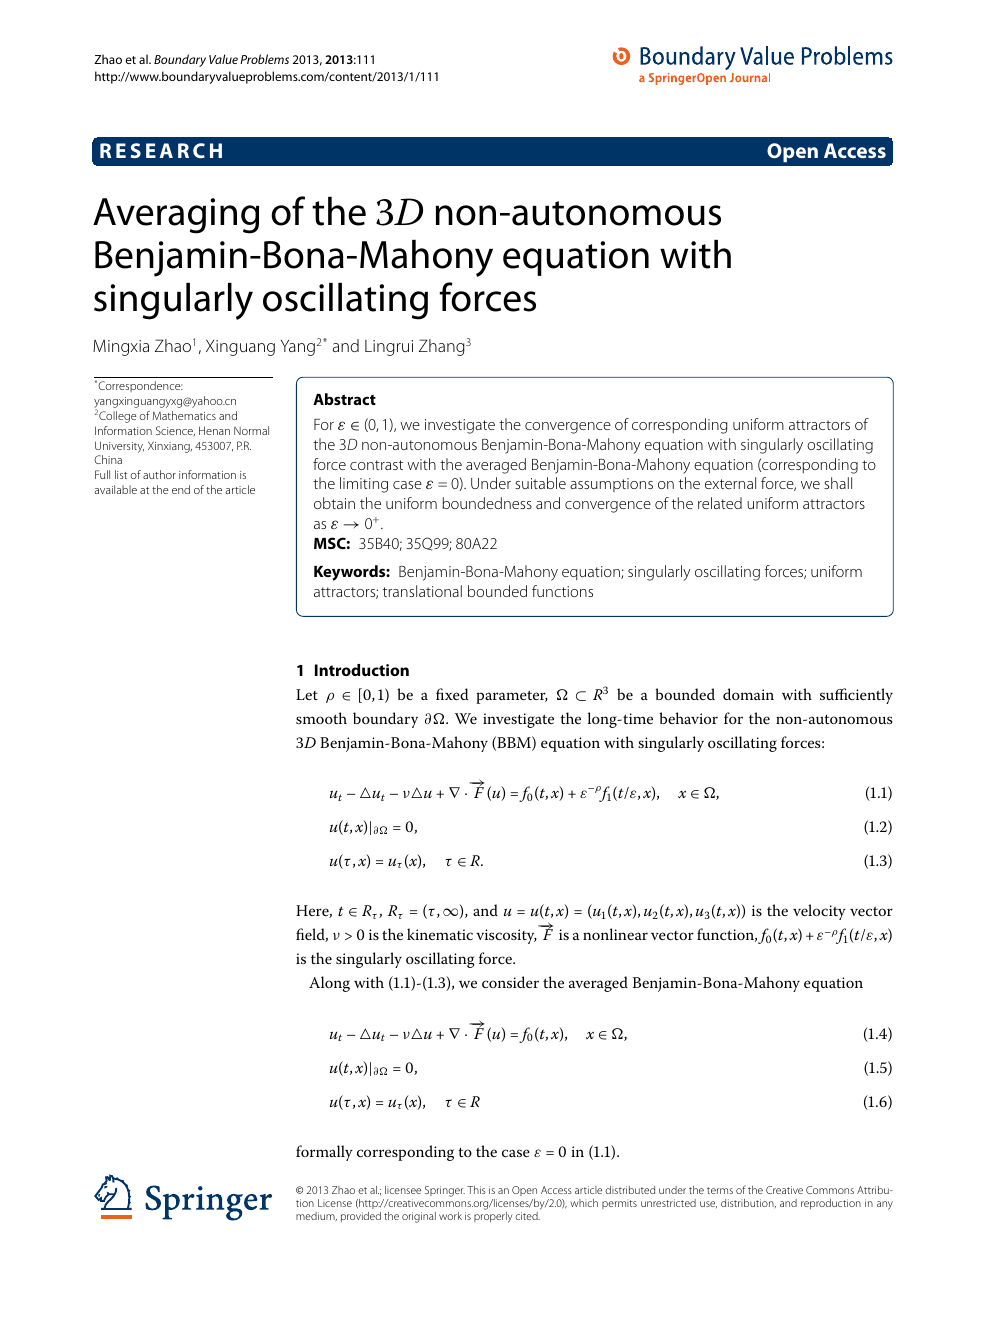 Averaging Of The 3d Non Autonomous Benjamin Bona Mahony Equation With Singularly Oscillating Forces Topic Of Research Paper In Mathematics Download Scholarly Article Pdf And Read For Free On Cyberleninka Open Science Hub